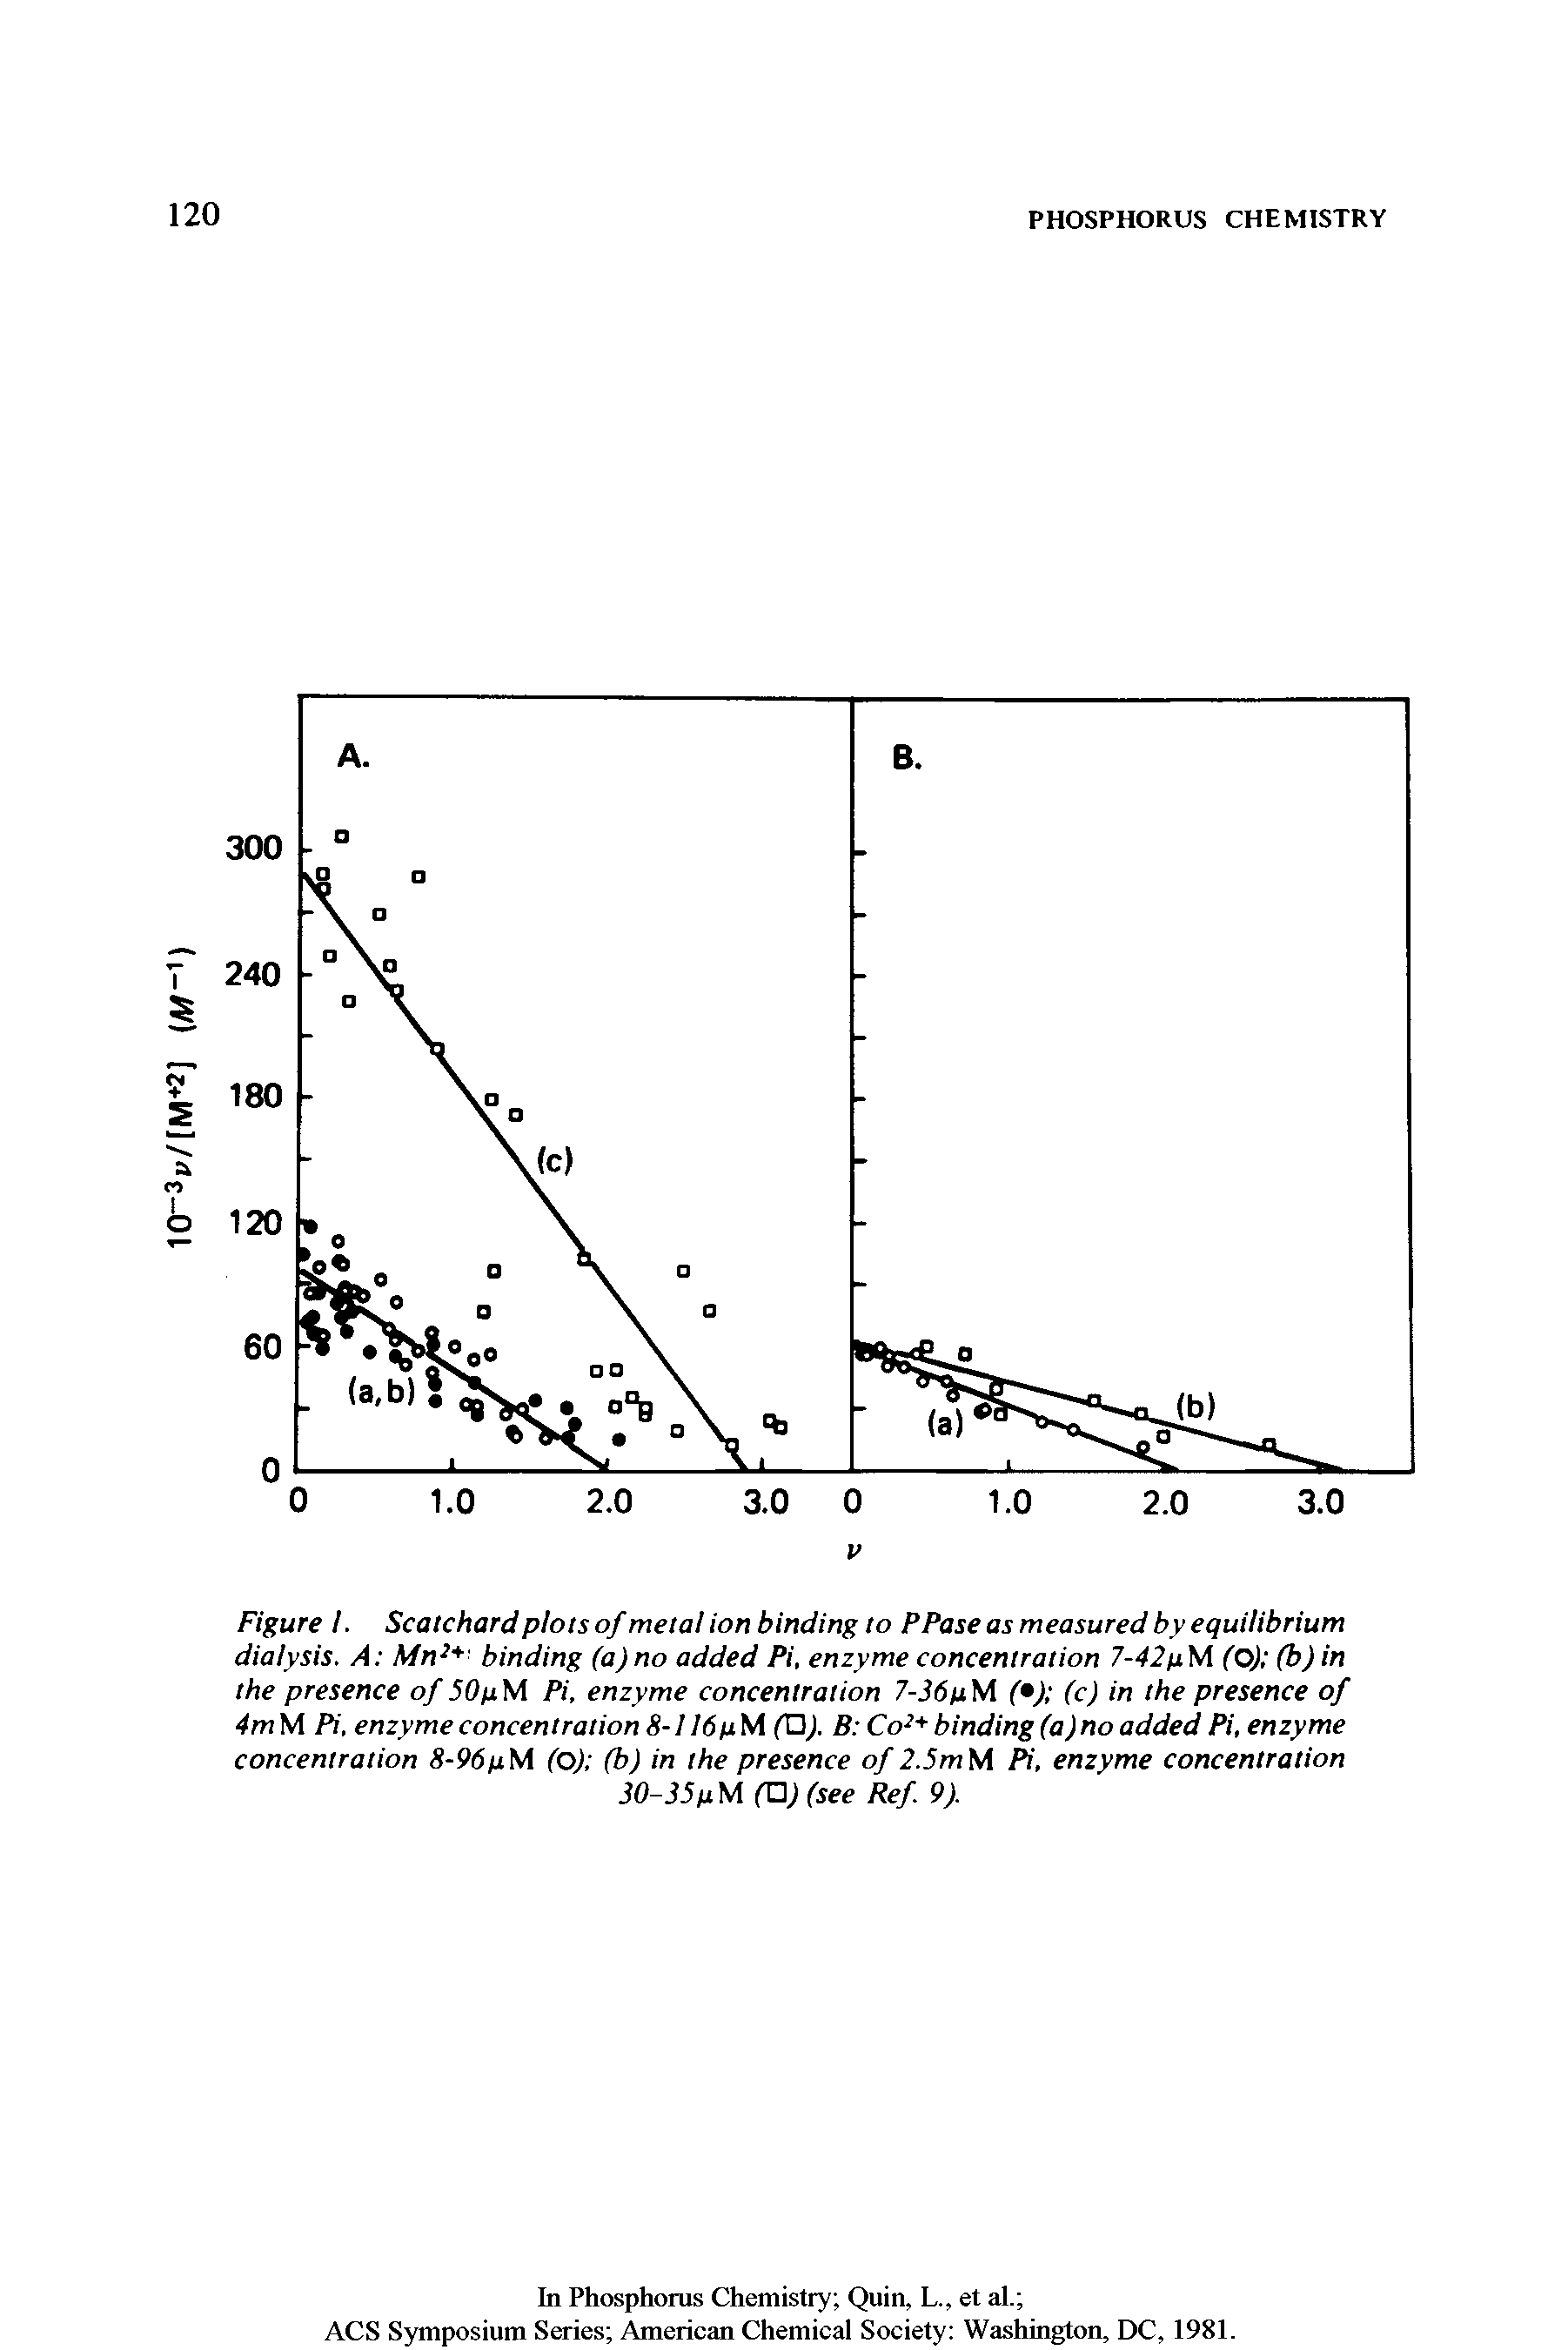 Figure I. Scatchard plots of metal ion binding to PPase as measured by equilibrium dialysis. A Mn2 binding (a) no added Pi, enzyme concentration 7-42/uM (O) (b) in the presence of 50/uM Pi, enzyme concentration 7-36pM ( ) (c) in the presence of 4mM Pi, enzyme concentration 8-116 p M (O). B Co2 binding (a) no added Pi, enzyme concentration 8-96pM (o) (b) in the presence of 2.5mM Pi, enzyme concentration 30-35p M (U) (see Ref. 9).